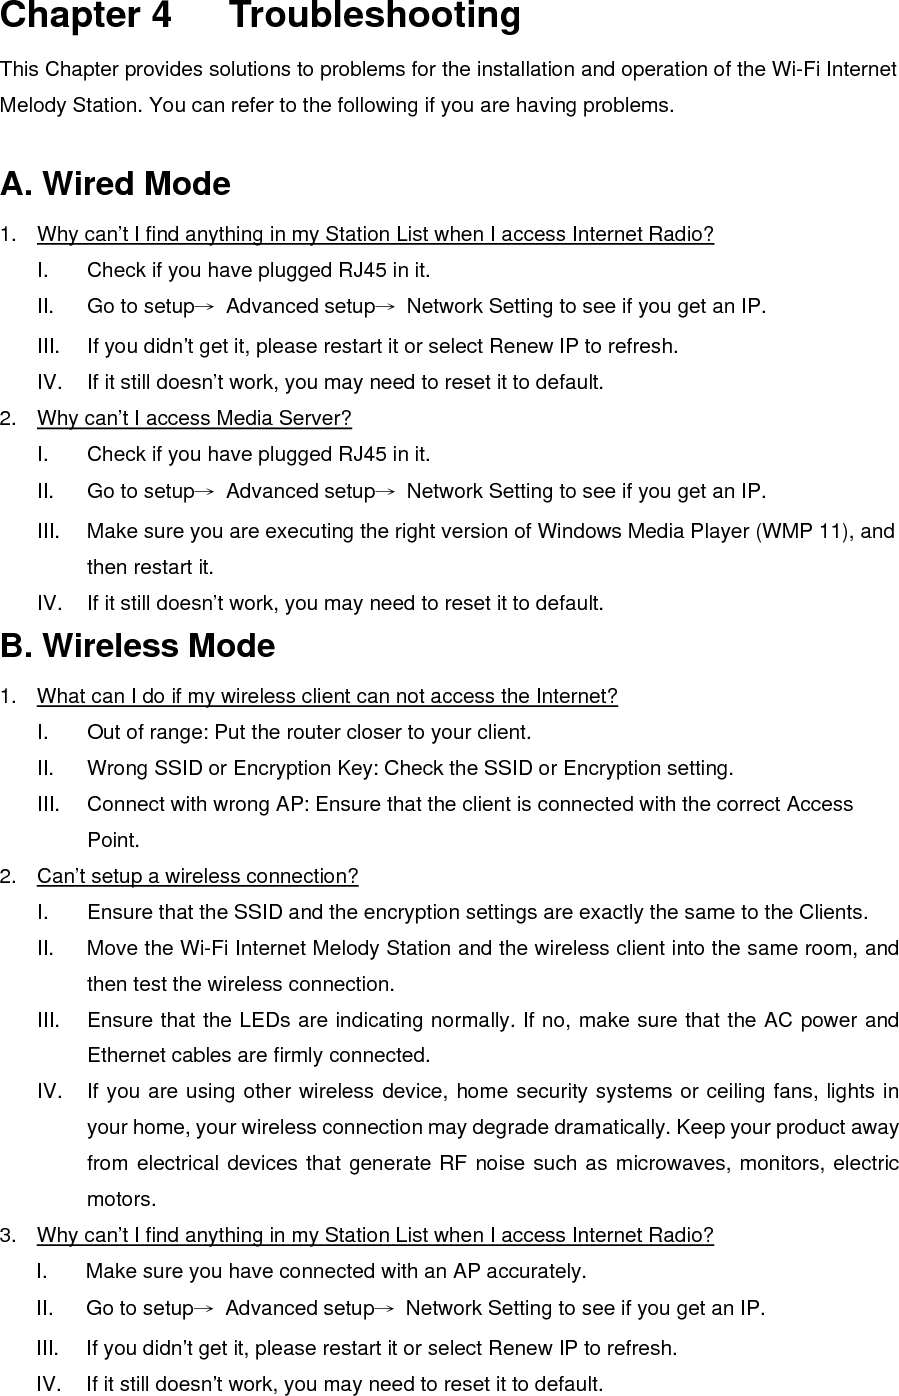  Chapter 4   Troubleshooting This Chapter provides solutions to problems for the installation and operation of the Wi-Fi Internet Melody Station. You can refer to the following if you are having problems.  A. Wired Mode 1.  Why can’t I find anything in my Station List when I access Internet Radio? I.  Check if you have plugged RJ45 in it. II.  Go to setup→ Advanced setup→  Network Setting to see if you get an IP. III.  If you didn’t get it, please restart it or select Renew IP to refresh. IV.  If it still doesn’t work, you may need to reset it to default. 2.  Why can’t I access Media Server? I.  Check if you have plugged RJ45 in it. II.  Go to setup→ Advanced setup→  Network Setting to see if you get an IP. III.  Make sure you are executing the right version of Windows Media Player (WMP 11), and then restart it. IV.  If it still doesn’t work, you may need to reset it to default. B. Wireless Mode 1.  What can I do if my wireless client can not access the Internet? I.  Out of range: Put the router closer to your client. II.  Wrong SSID or Encryption Key: Check the SSID or Encryption setting. III.  Connect with wrong AP: Ensure that the client is connected with the correct Access Point. 2.  Can’t setup a wireless connection? I.  Ensure that the SSID and the encryption settings are exactly the same to the Clients. II.  Move the Wi-Fi Internet Melody Station and the wireless client into the same room, and then test the wireless connection. III.  Ensure that the LEDs are indicating normally. If no, make sure that the AC power and Ethernet cables are firmly connected. IV.  If you are using other wireless device, home security systems or ceiling fans, lights in your home, your wireless connection may degrade dramatically. Keep your product away from electrical devices that generate RF noise such as microwaves, monitors, electric motors. 3.  Why can’t I find anything in my Station List when I access Internet Radio? I.  Make sure you have connected with an AP accurately. II.  Go to setup→ Advanced setup→  Network Setting to see if you get an IP. III.  If you didn’t get it, please restart it or select Renew IP to refresh. IV.  If it still doesn’t work, you may need to reset it to default.